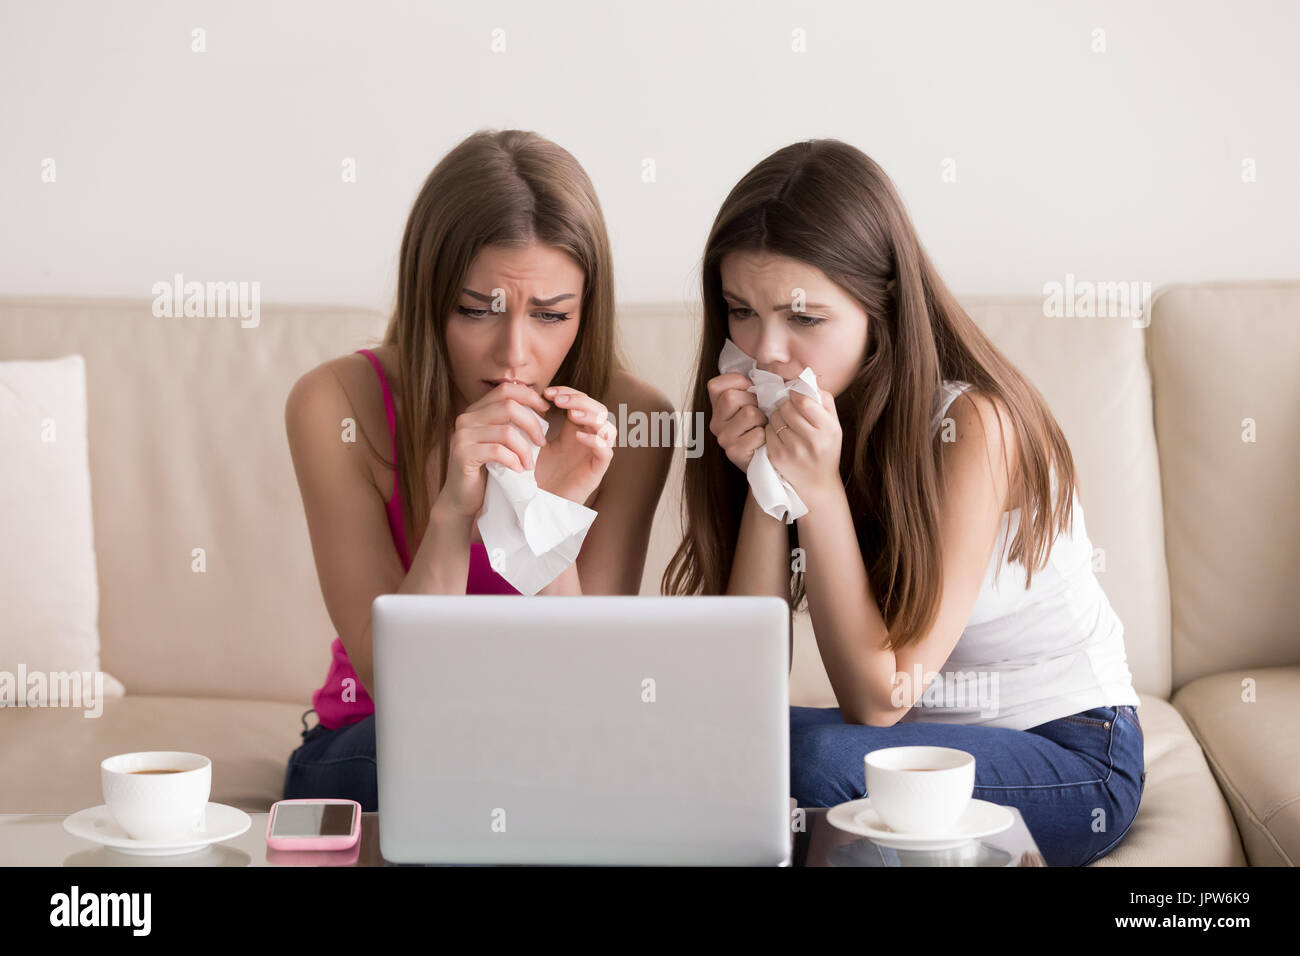 Two girlfriends crying while watching sad movie Stock Photo